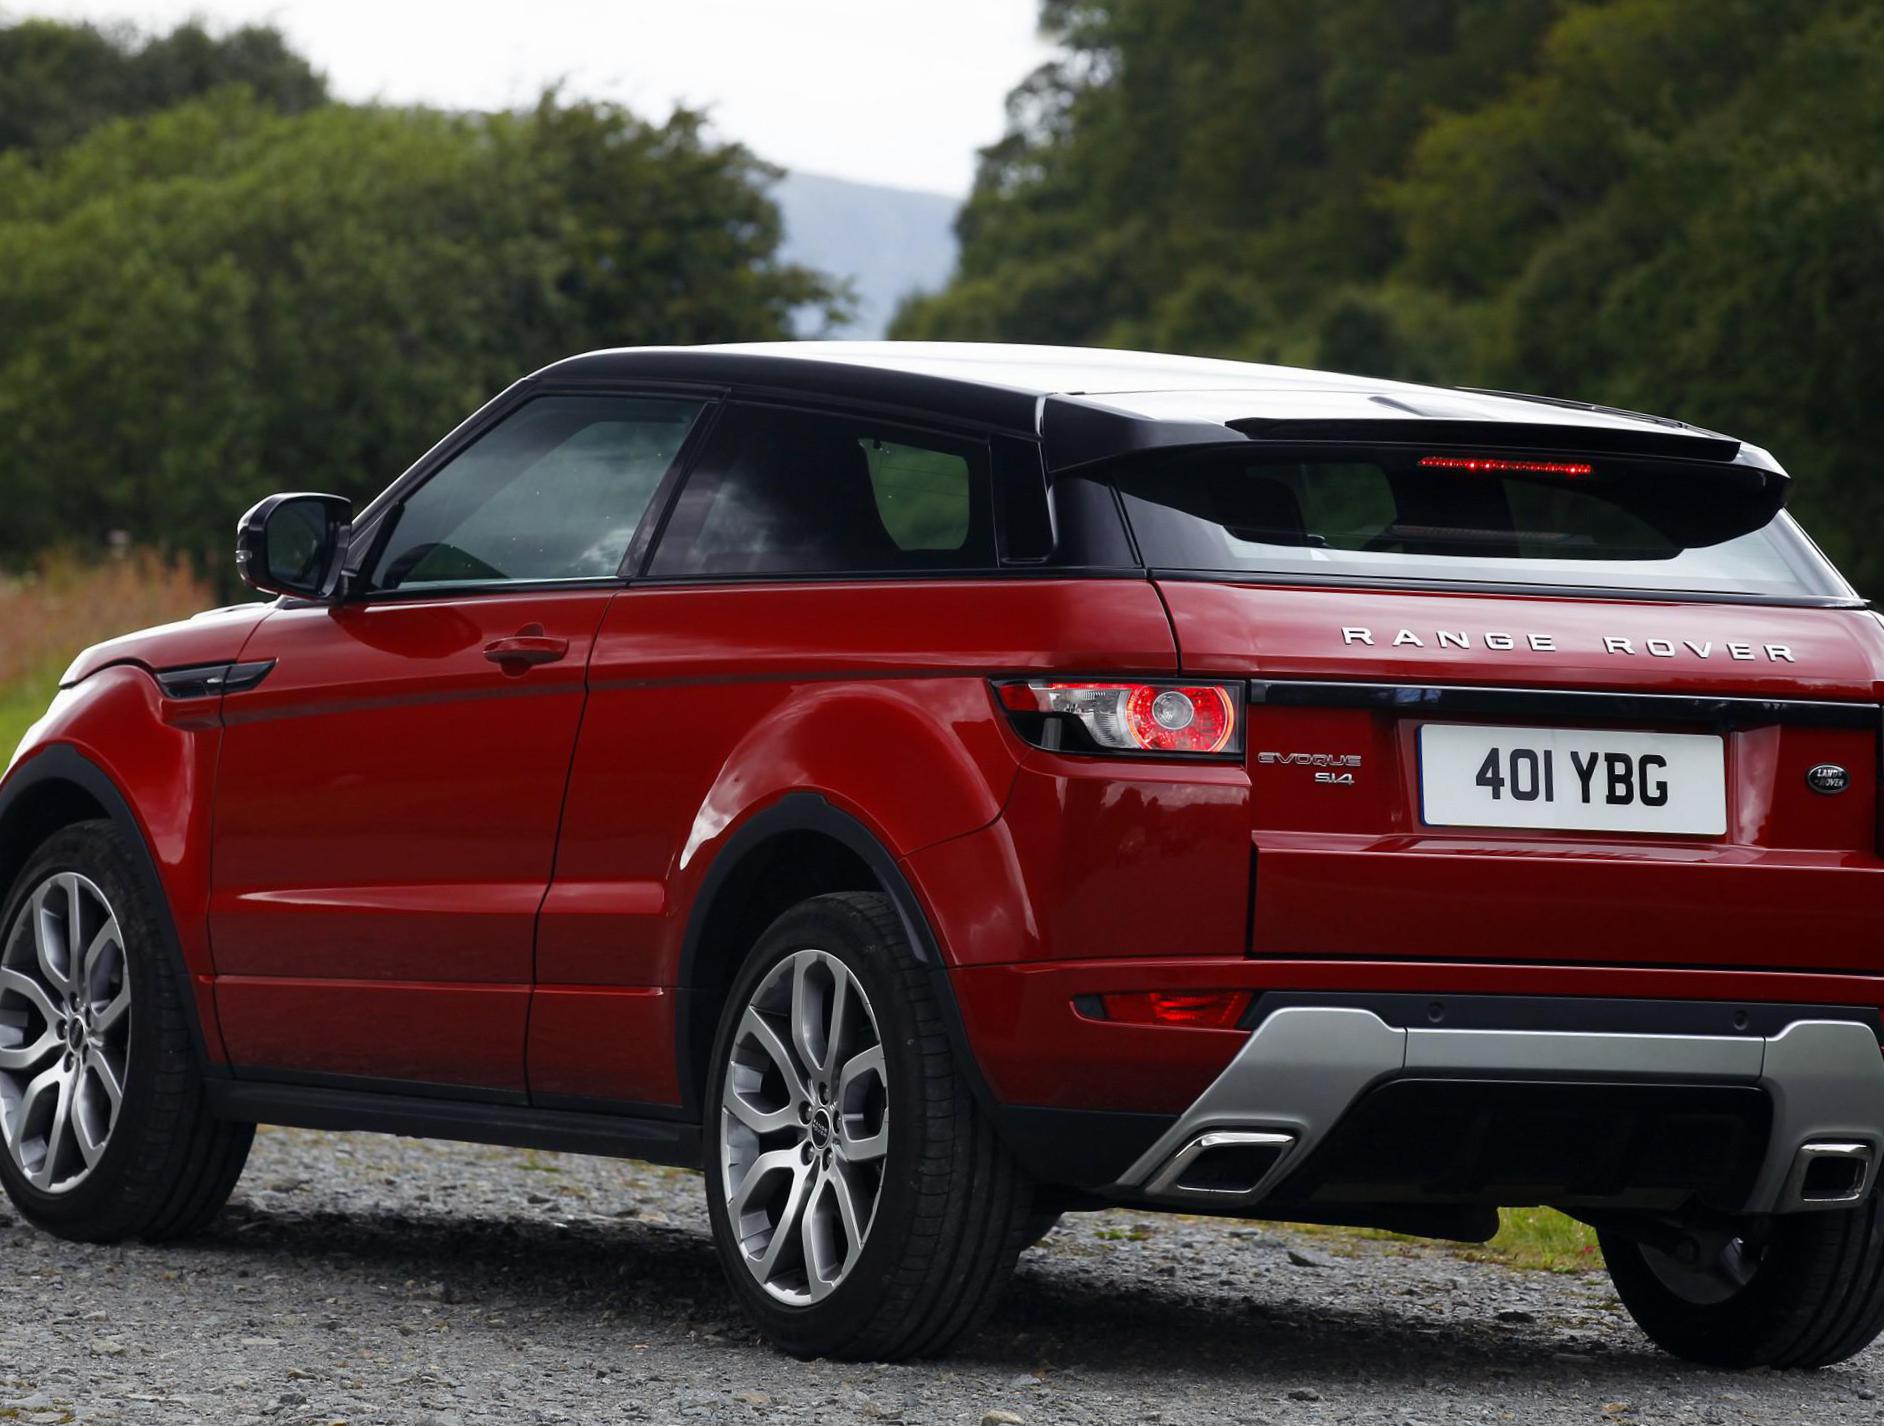 Land Rover Range Rover Evoque Coupe Specification 2012